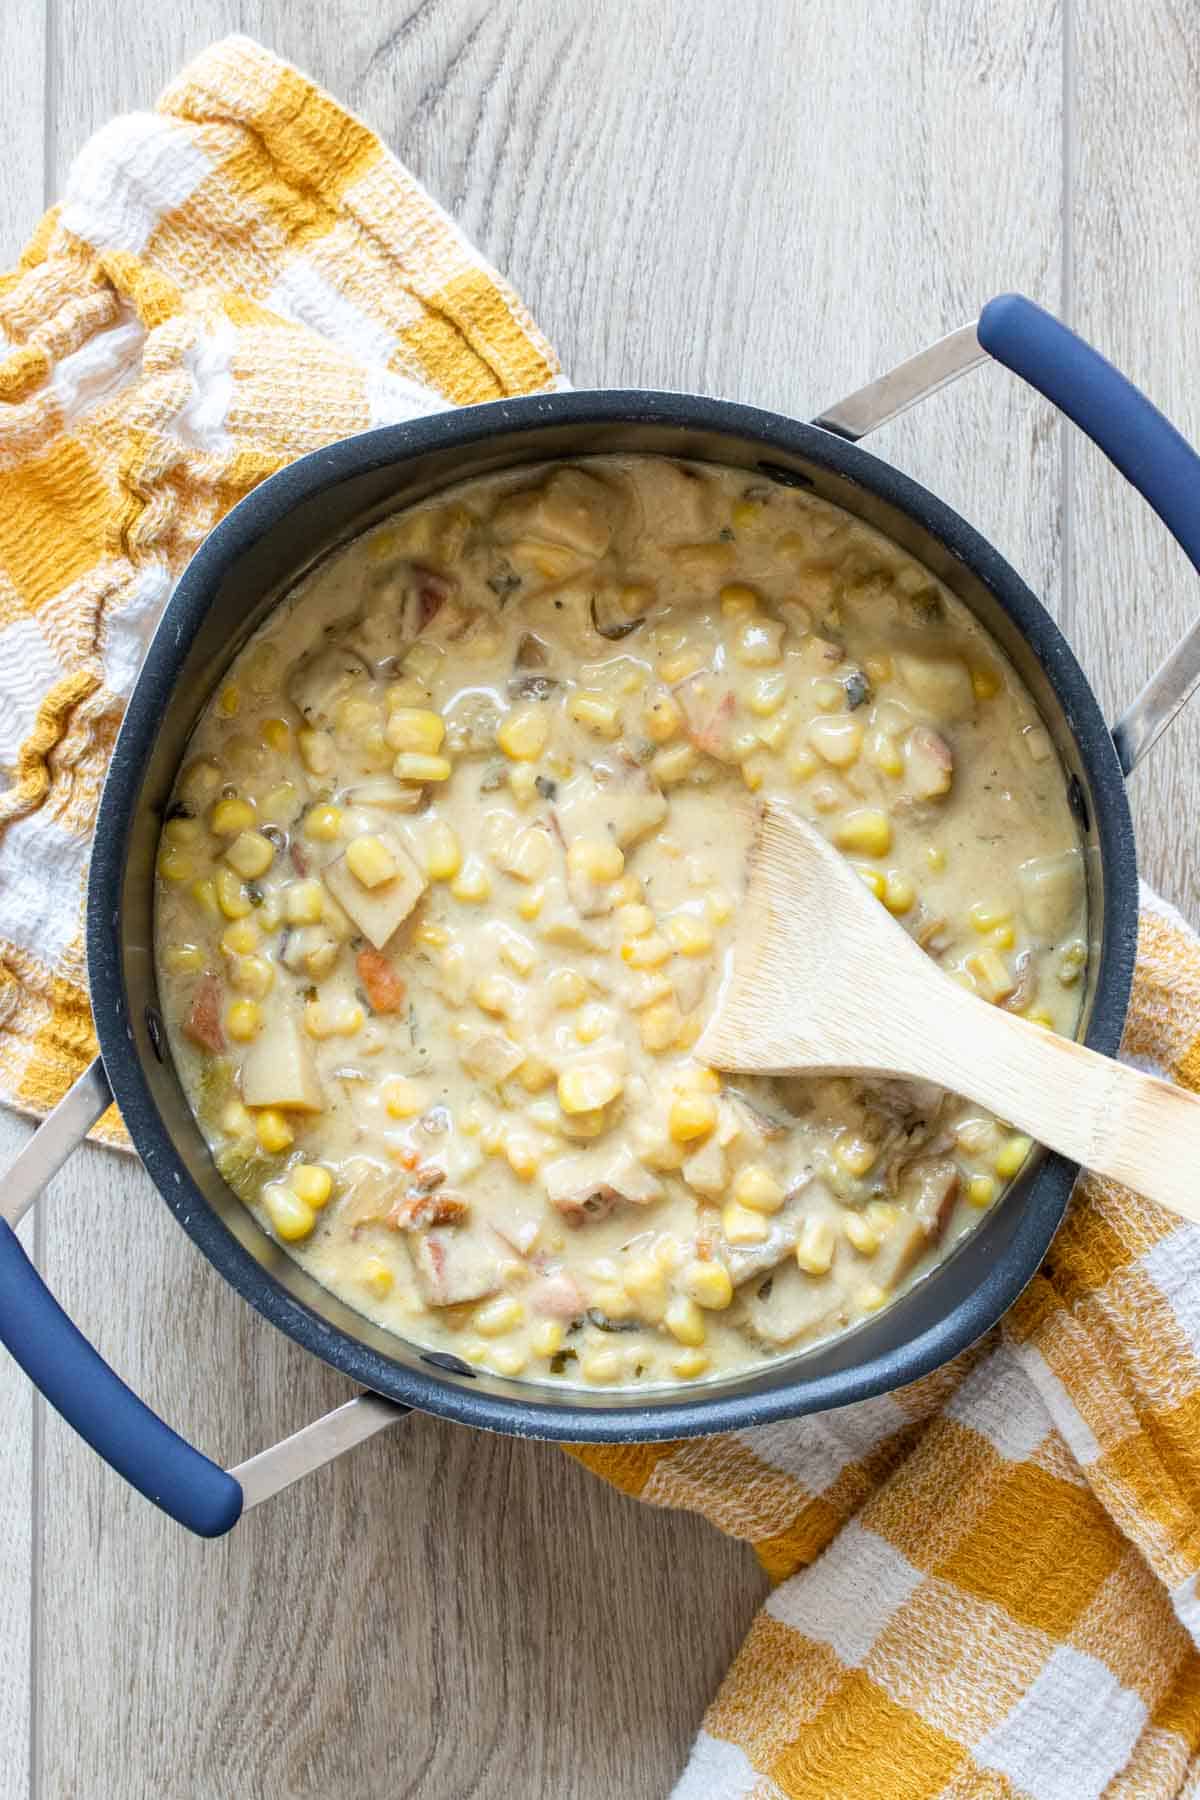 Wooden spoon mixing a creamy corn, potato and pepper soup in a pot.